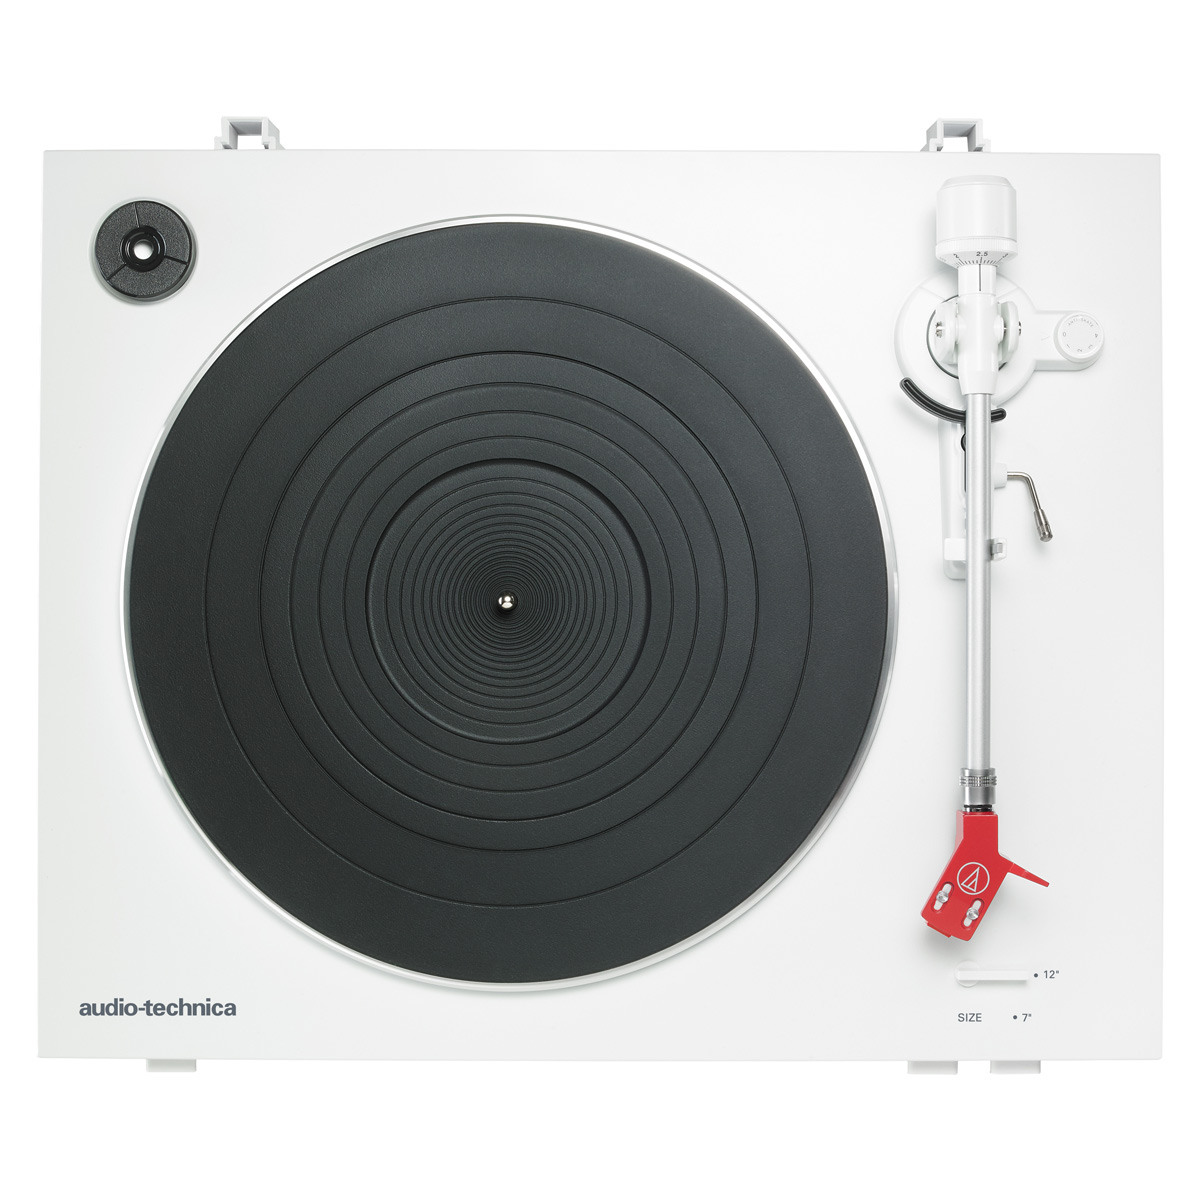 Audio-Technica Fully Automatic Belt Drive Stereo Turntable Record Player, White - image 2 of 2